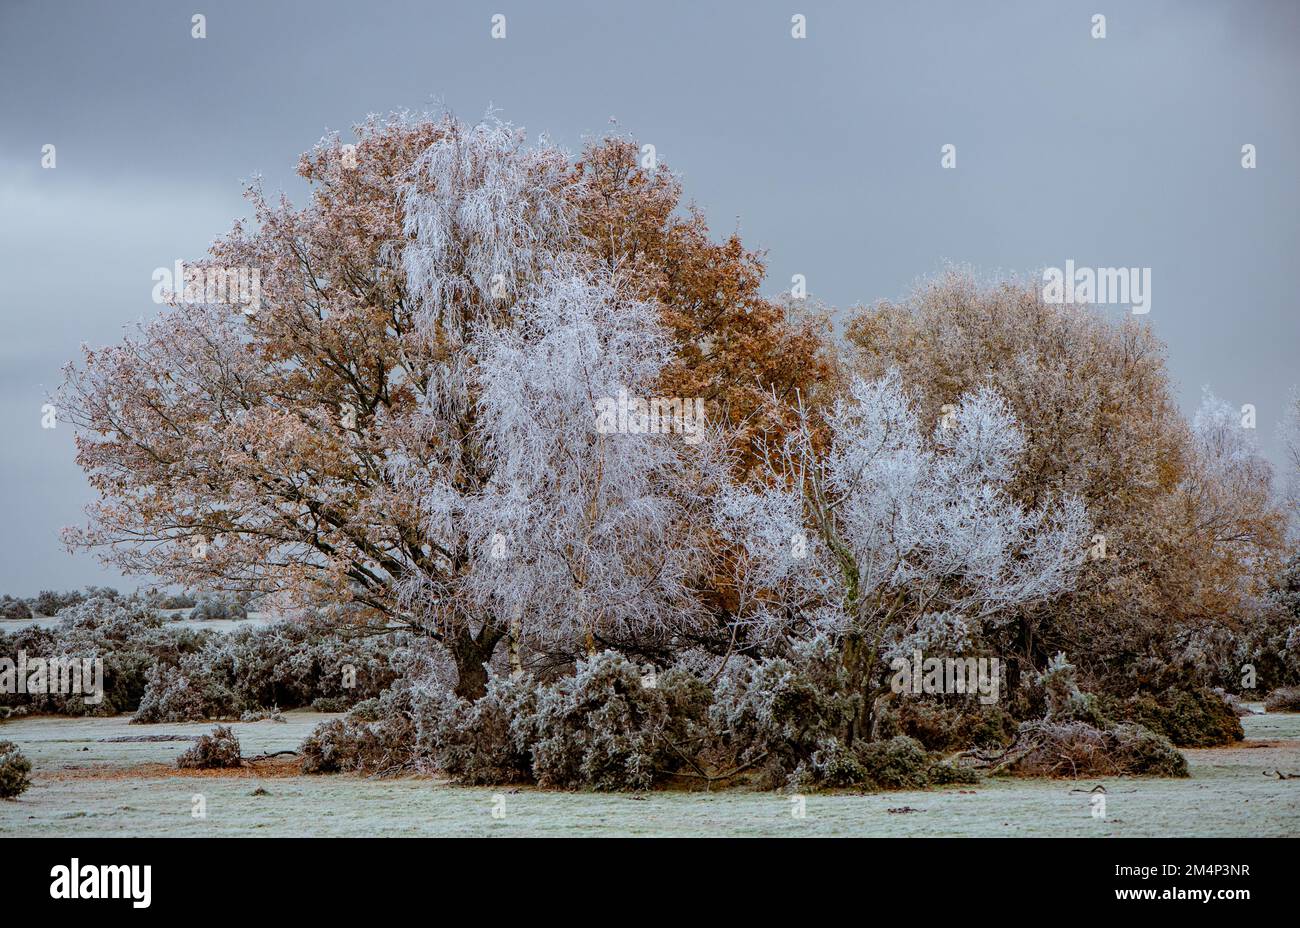 A frosty orange oak tree amongst birch trees that are frozen and white during the winter cold snap in the New Forest Hampshire Uk. Weather landscape. Stock Photo